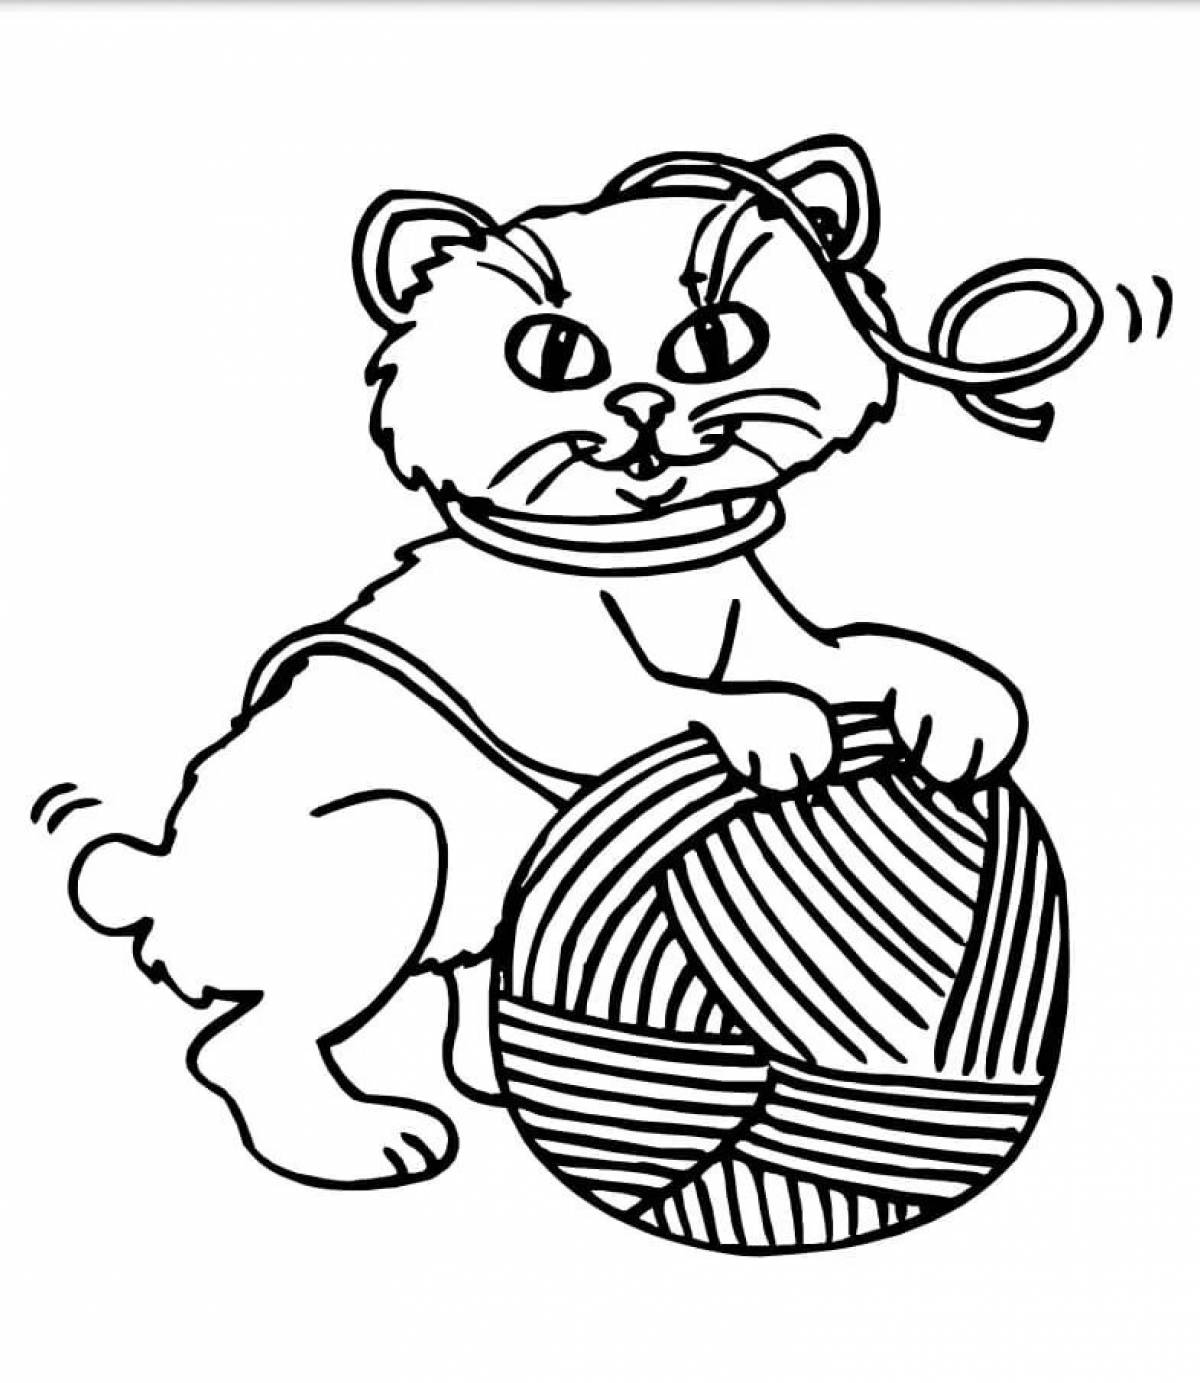 Coloring book peaceful cat with a ball